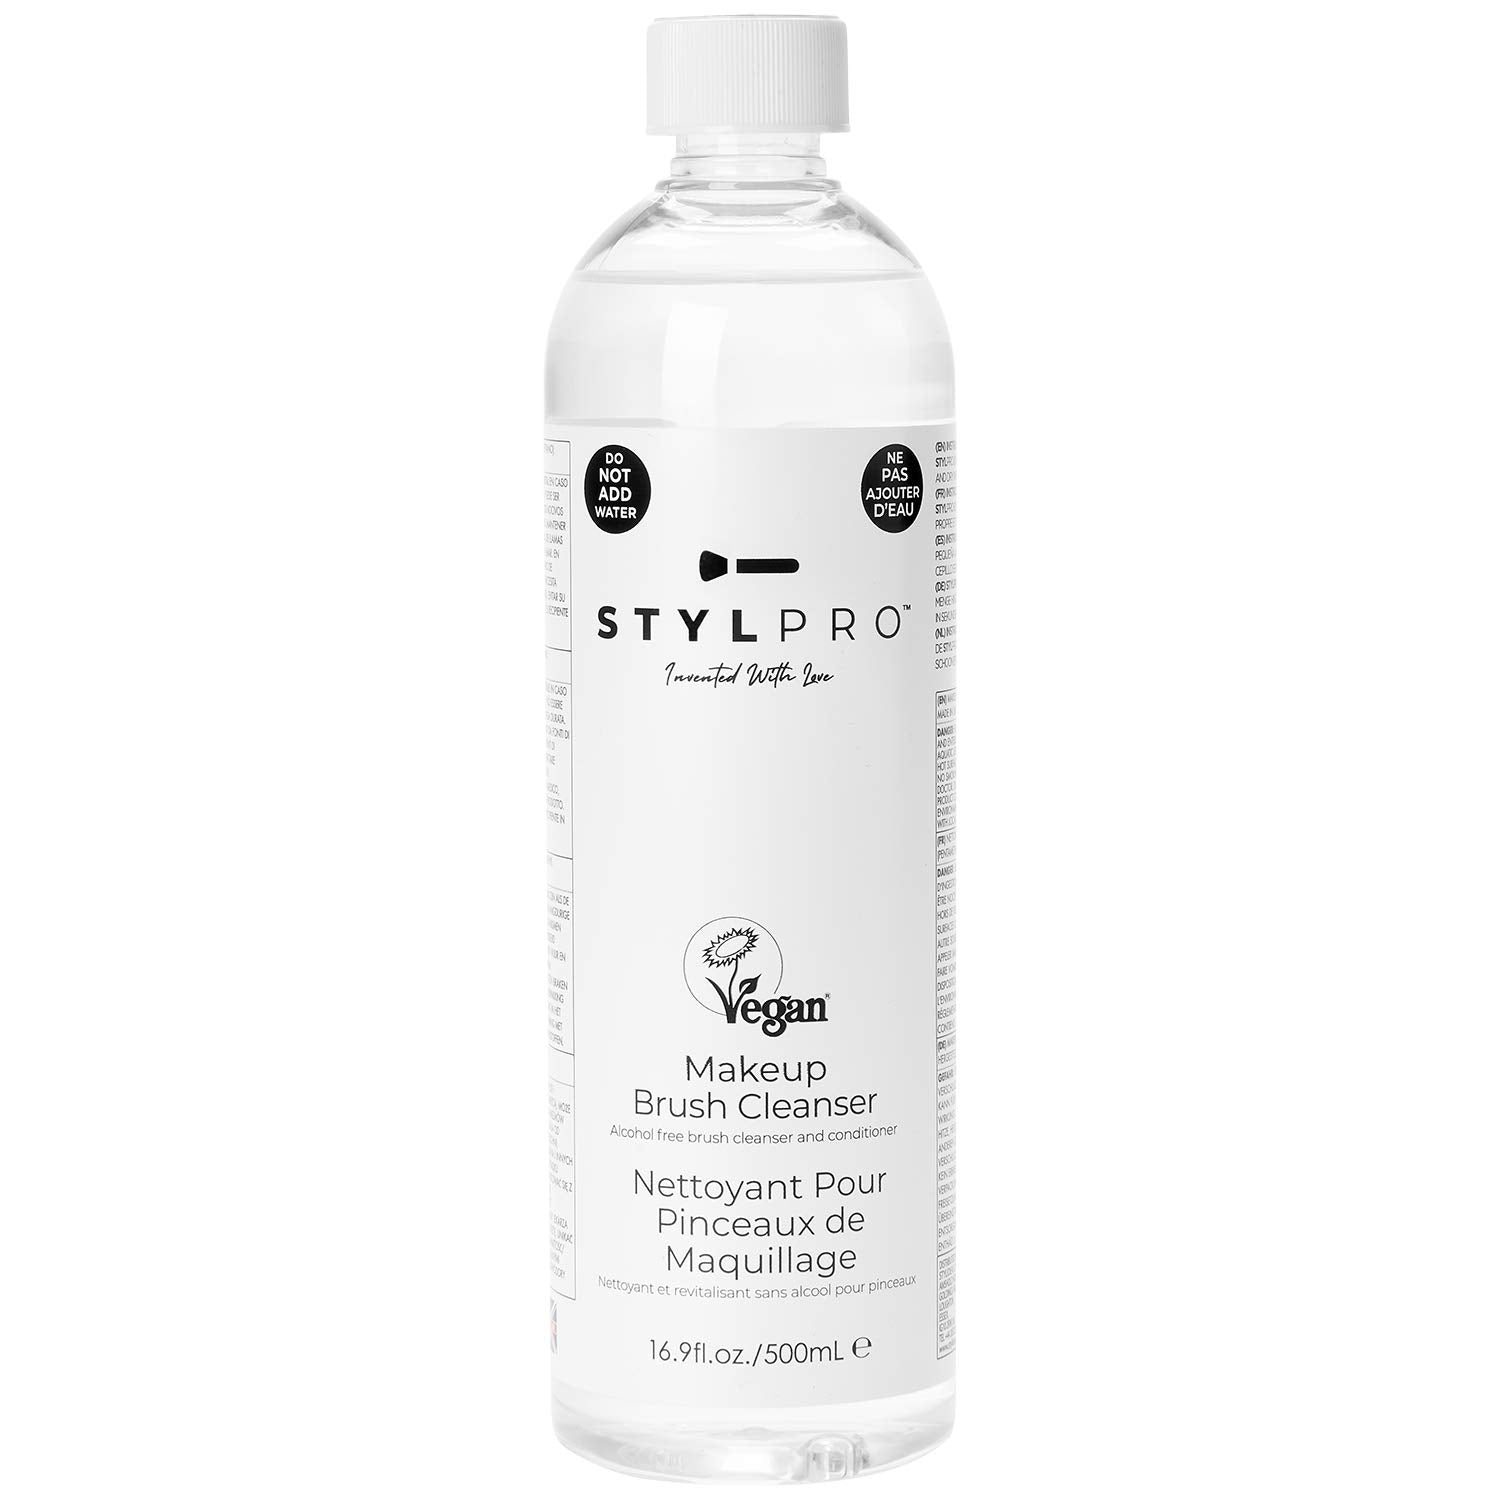 Stylpro Brush Cleanser